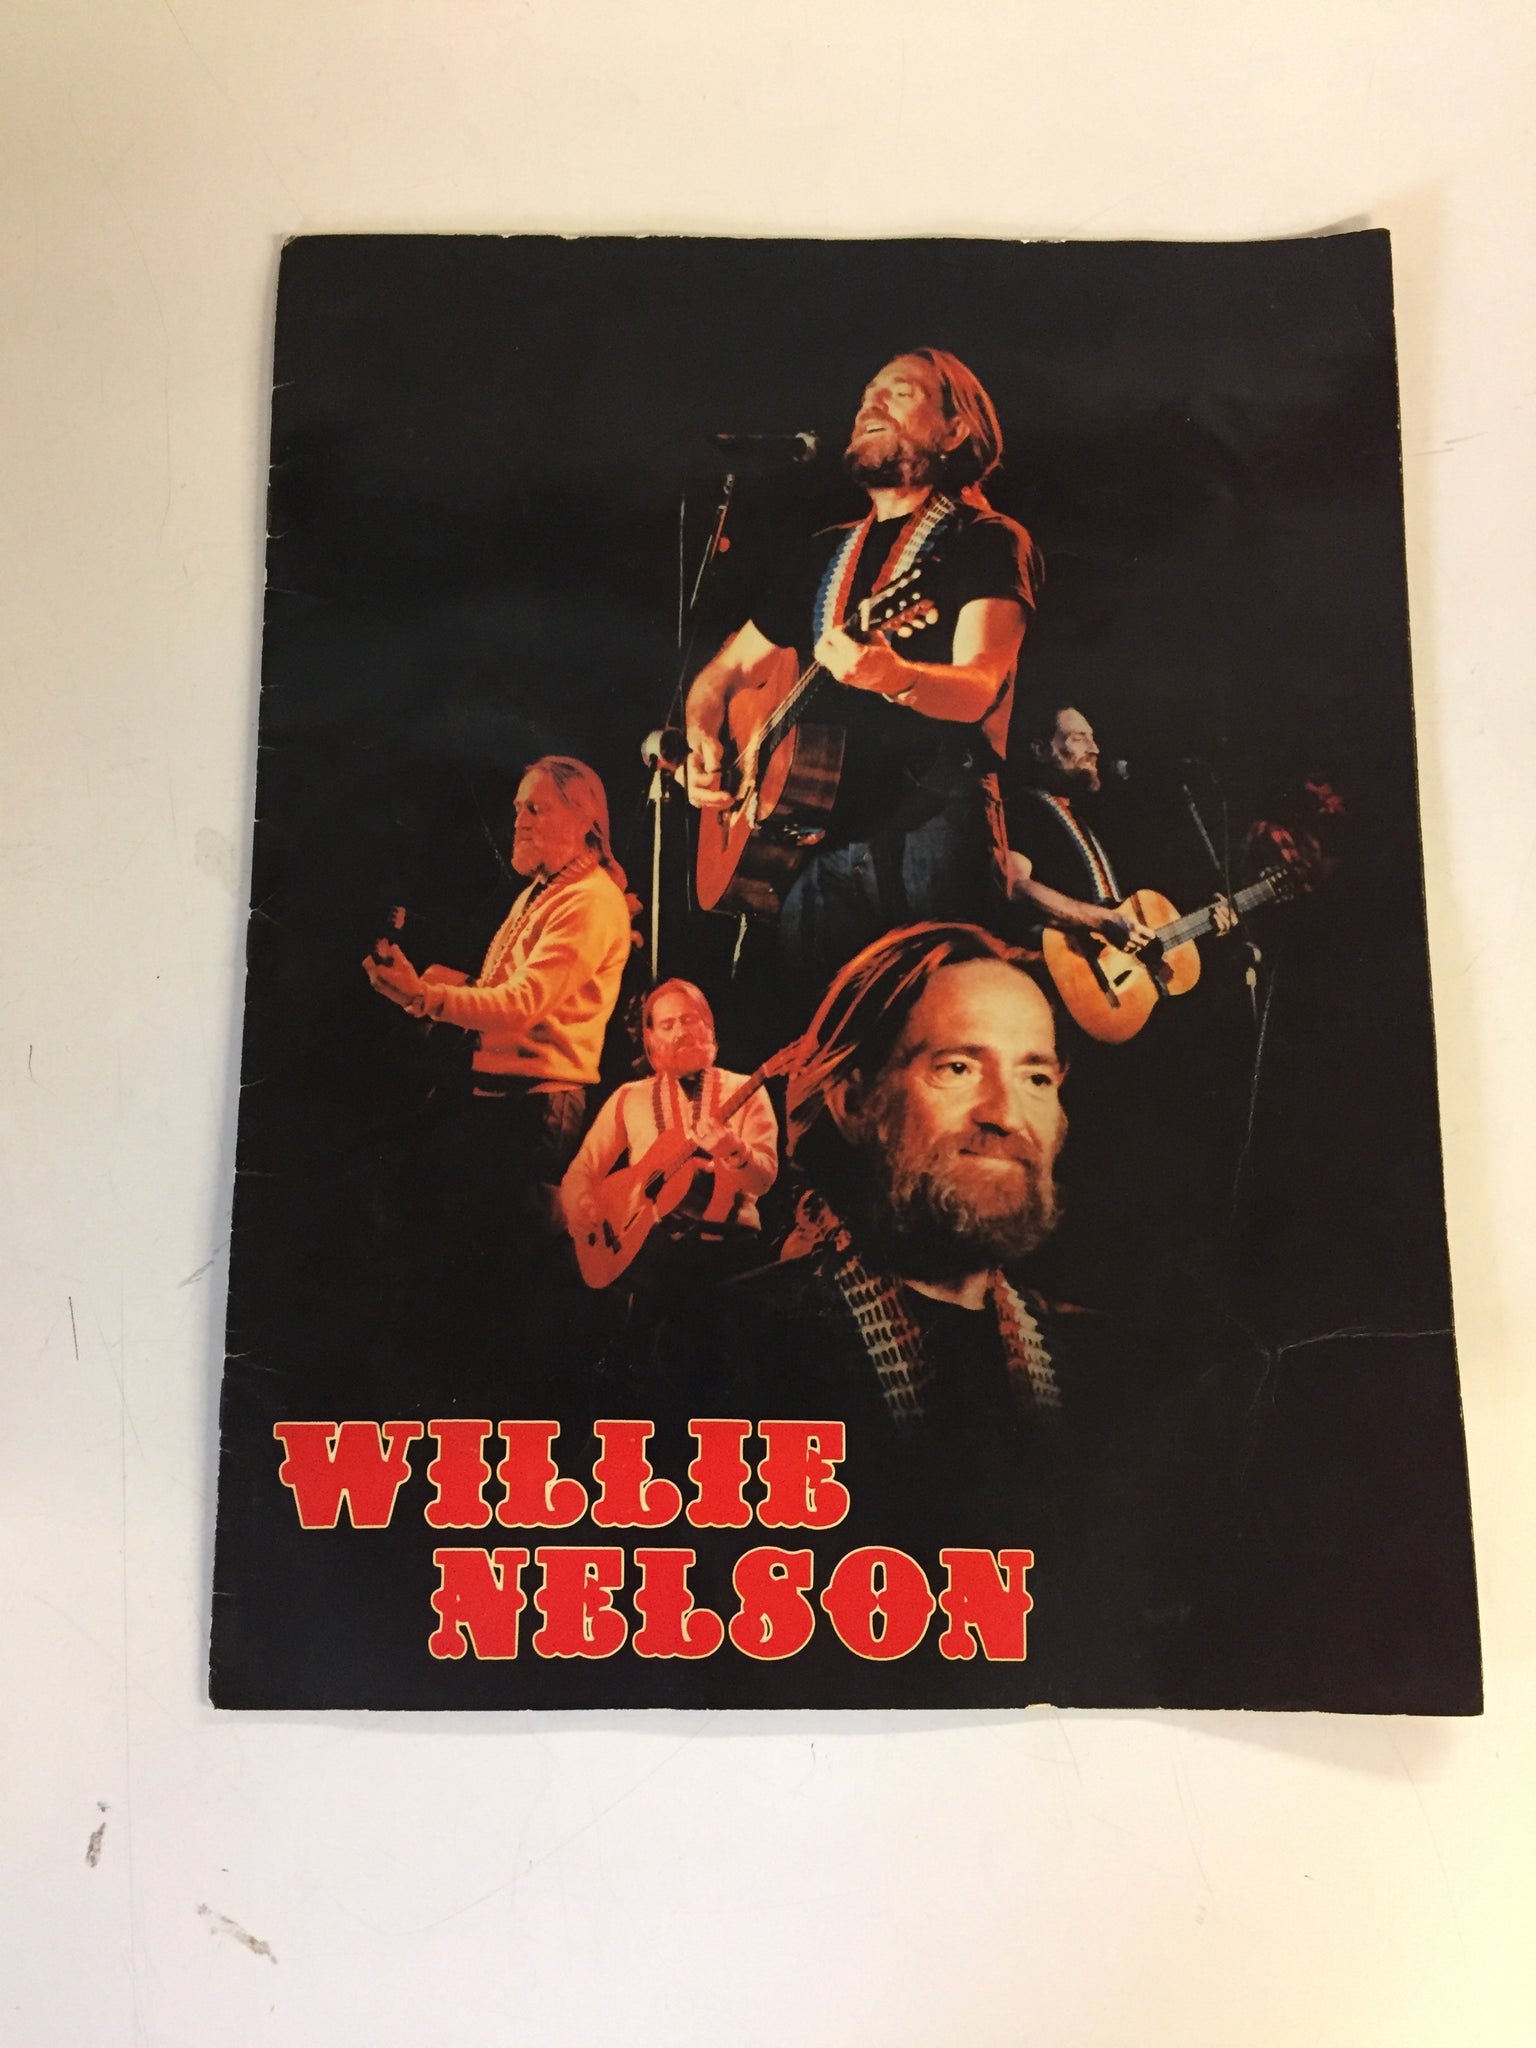 Vintage WILLIE NELSON Concert Program The Great Texas Brain Fry Country Music